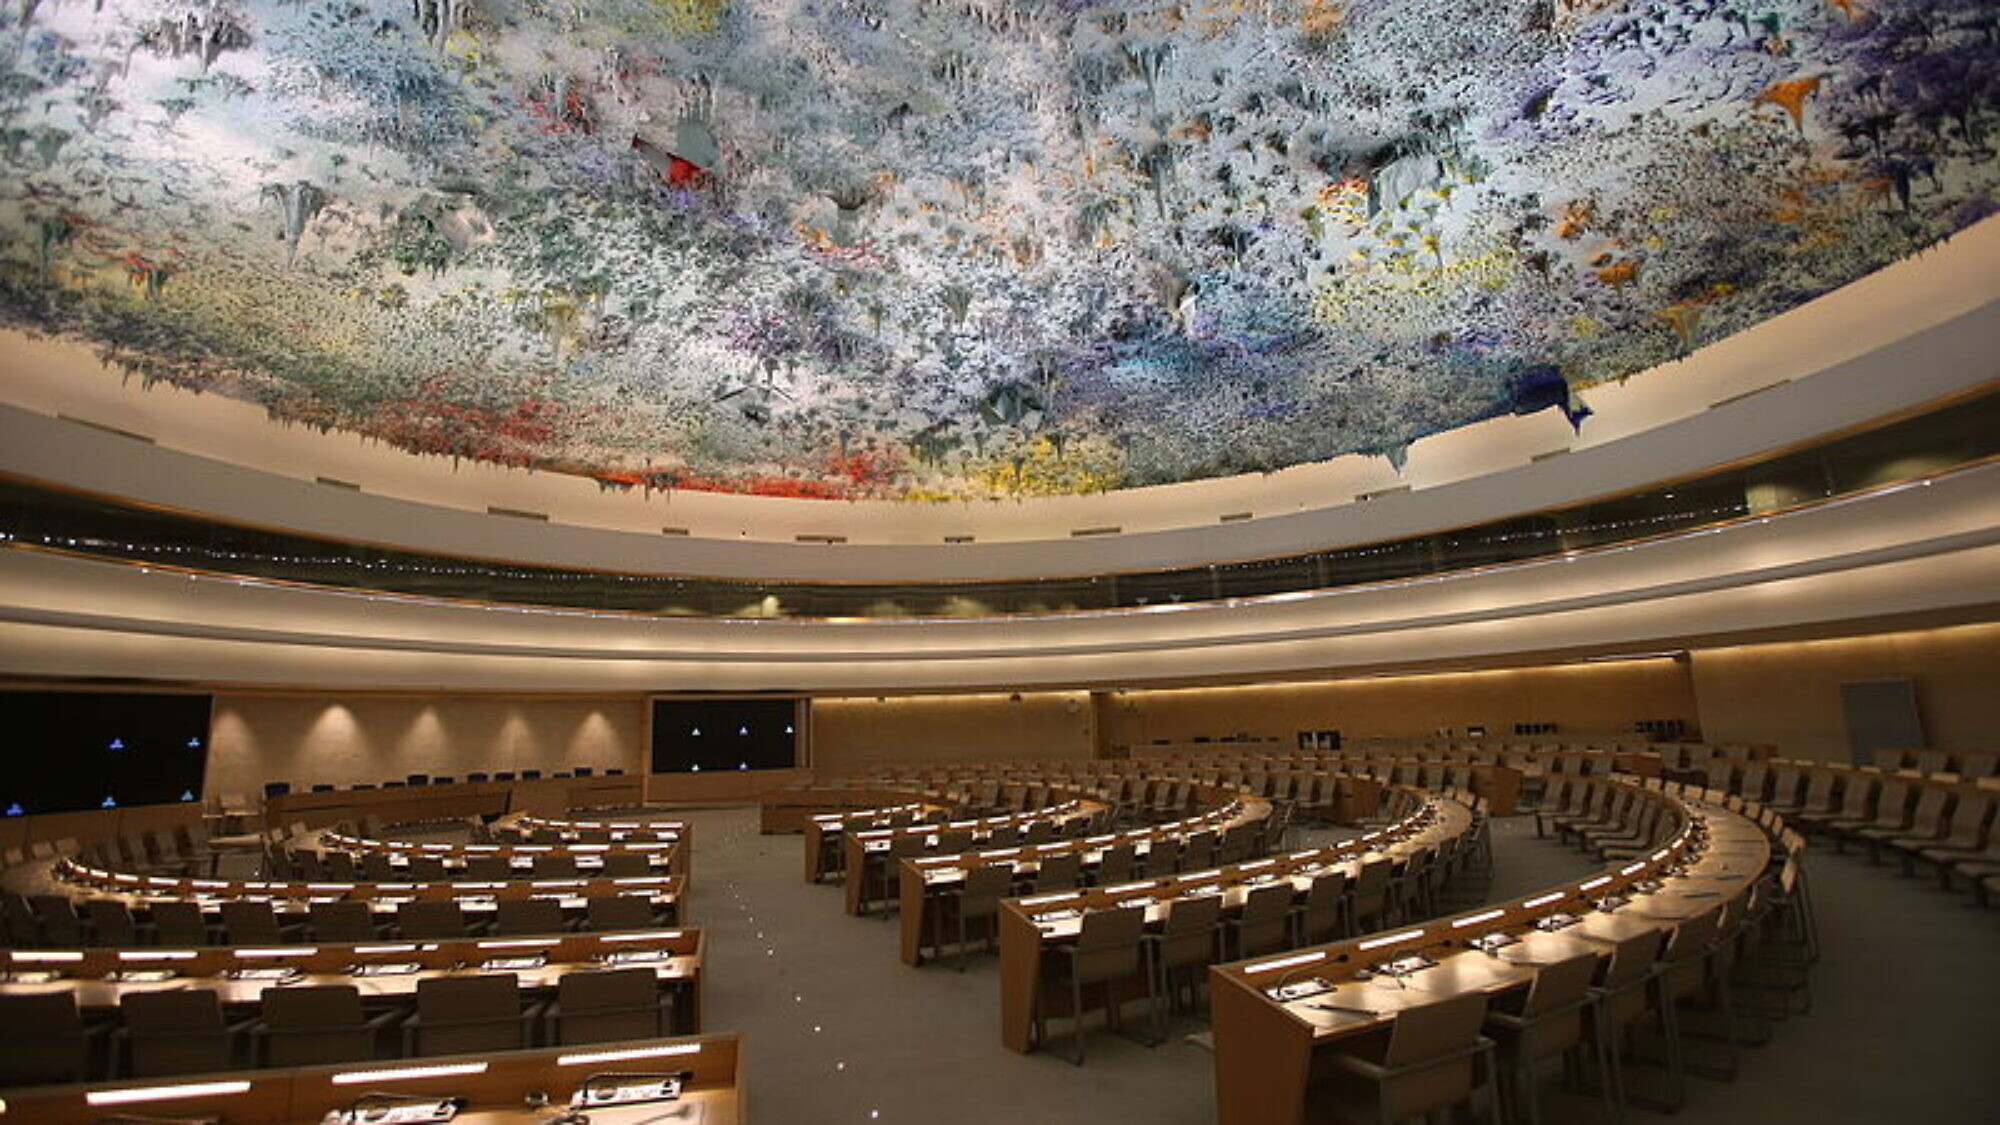 The Human Rights and Alliance of Civilizations Room in the Palace of Nations